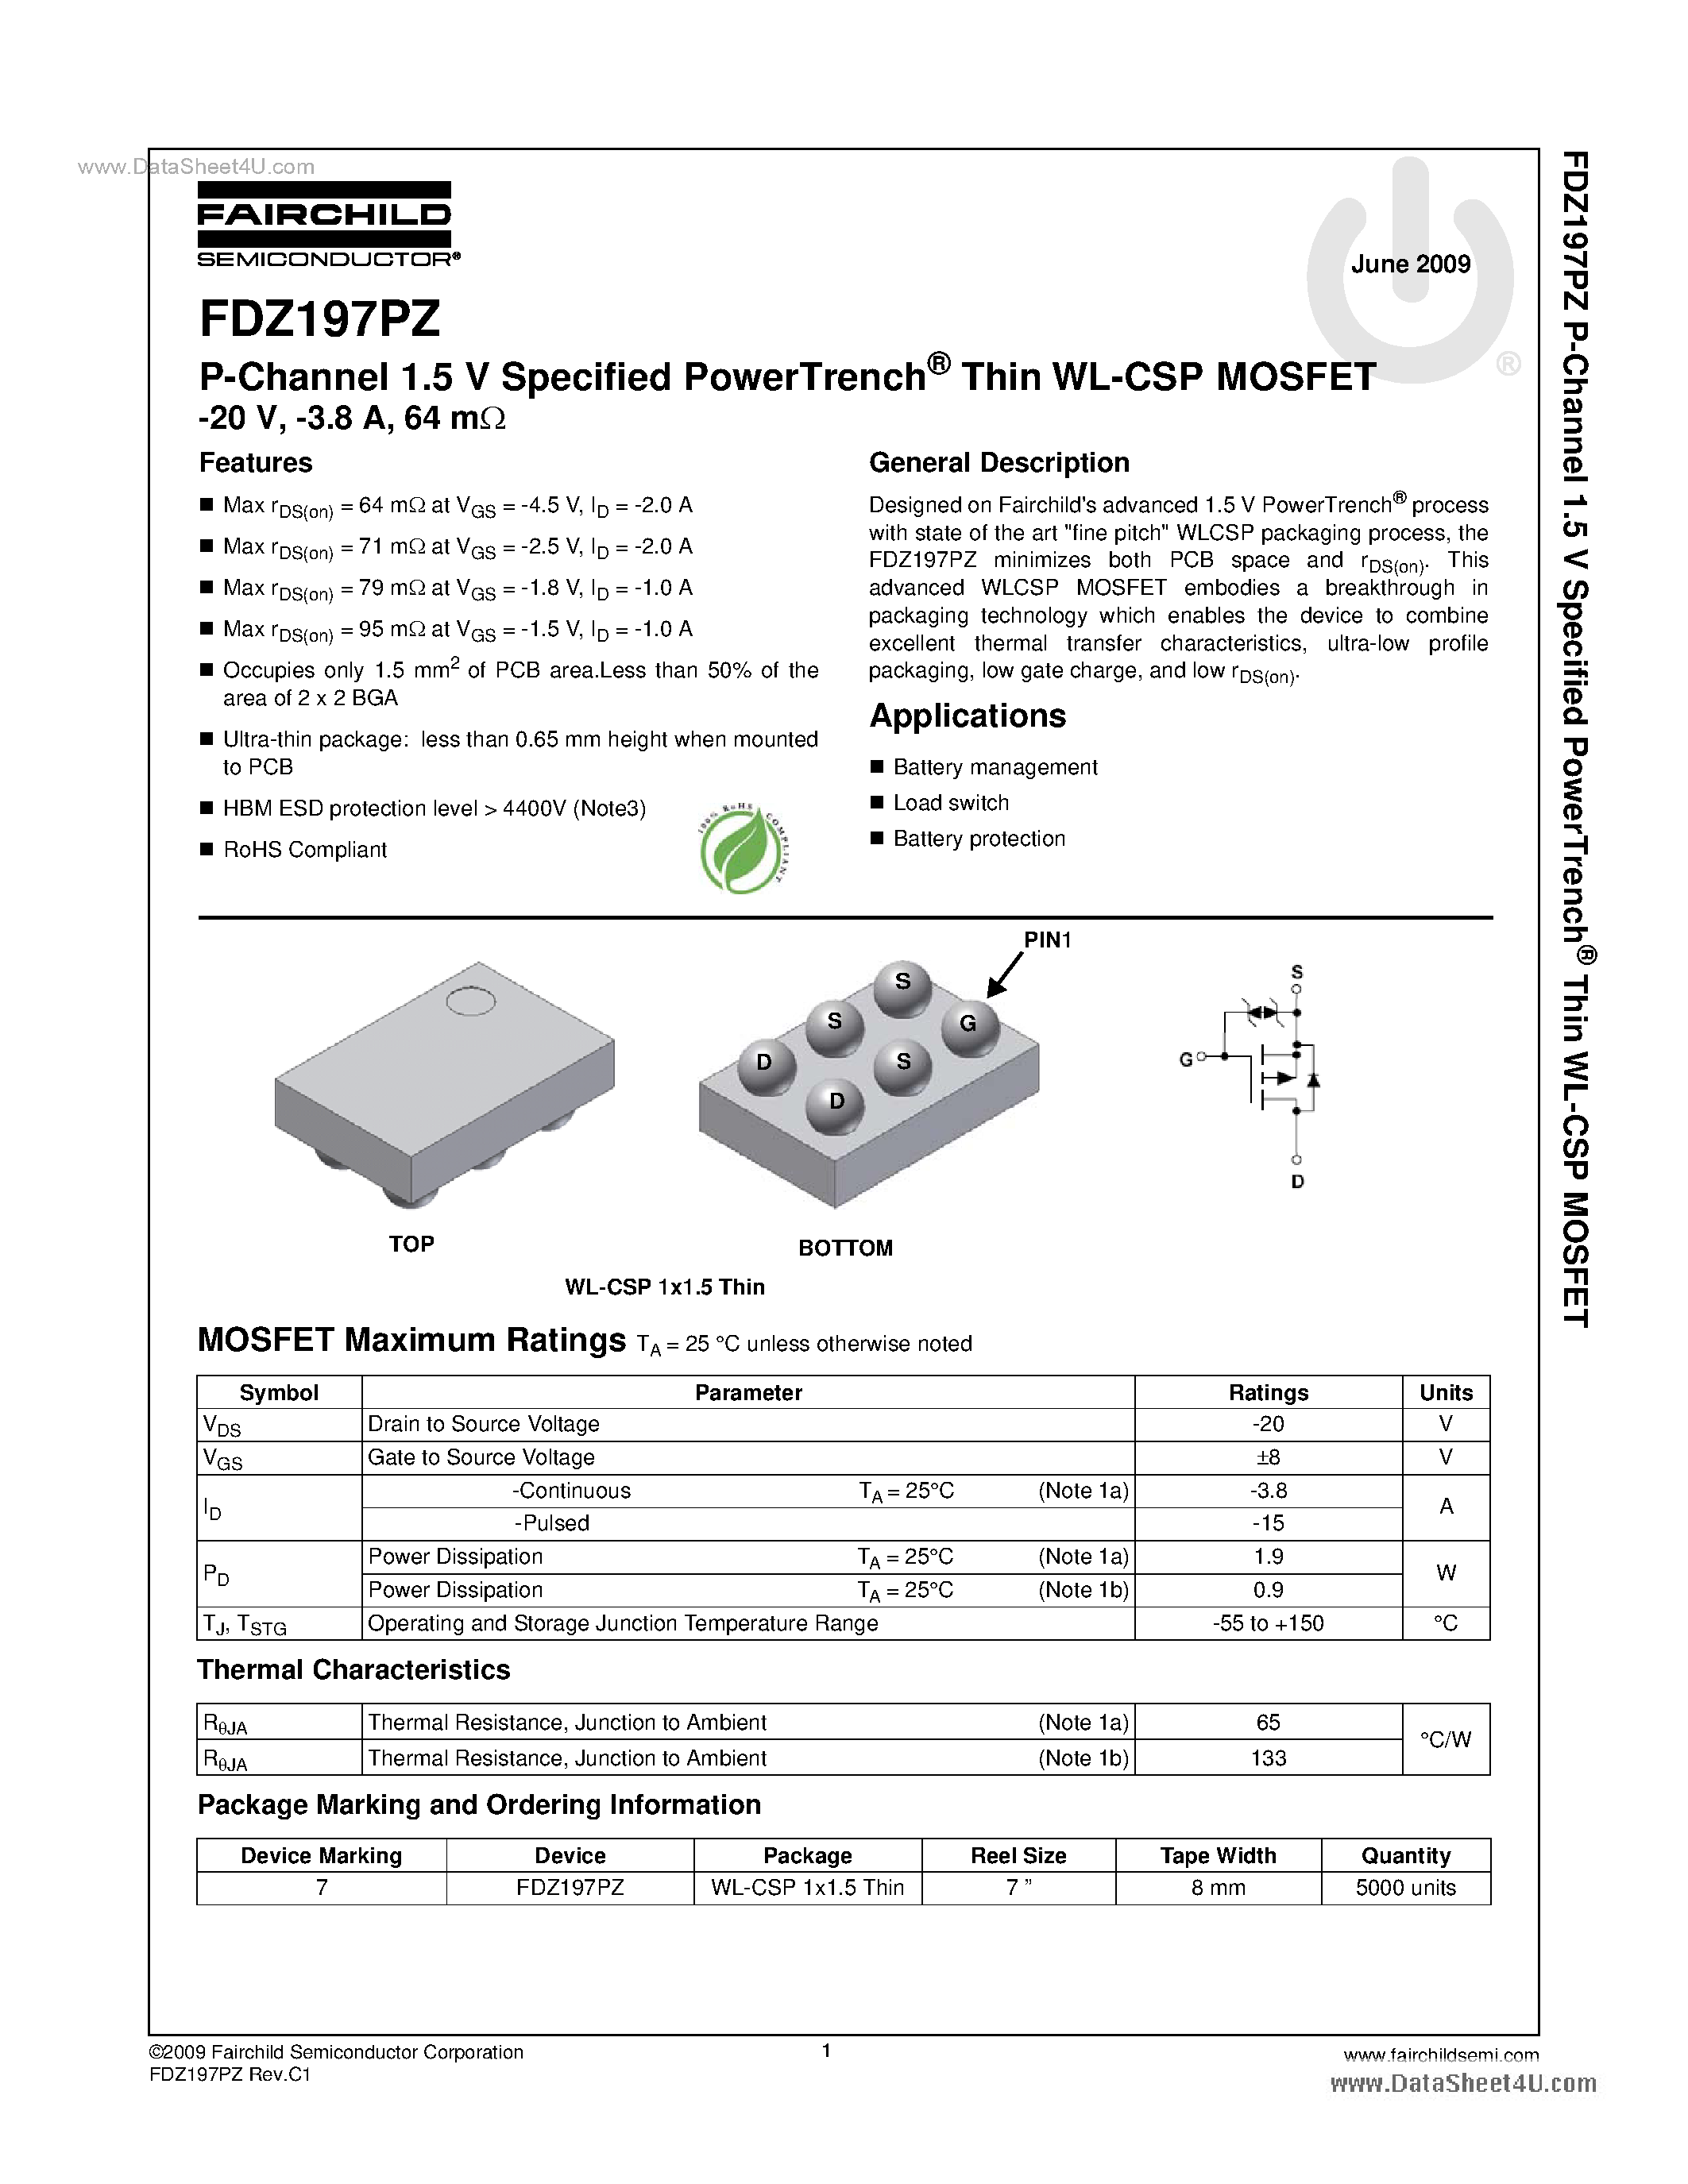 Даташит FDZ197PZ - -20V P-Channel 1.5V Specified PowerTrench Thin WL-CSP MOSFET страница 1